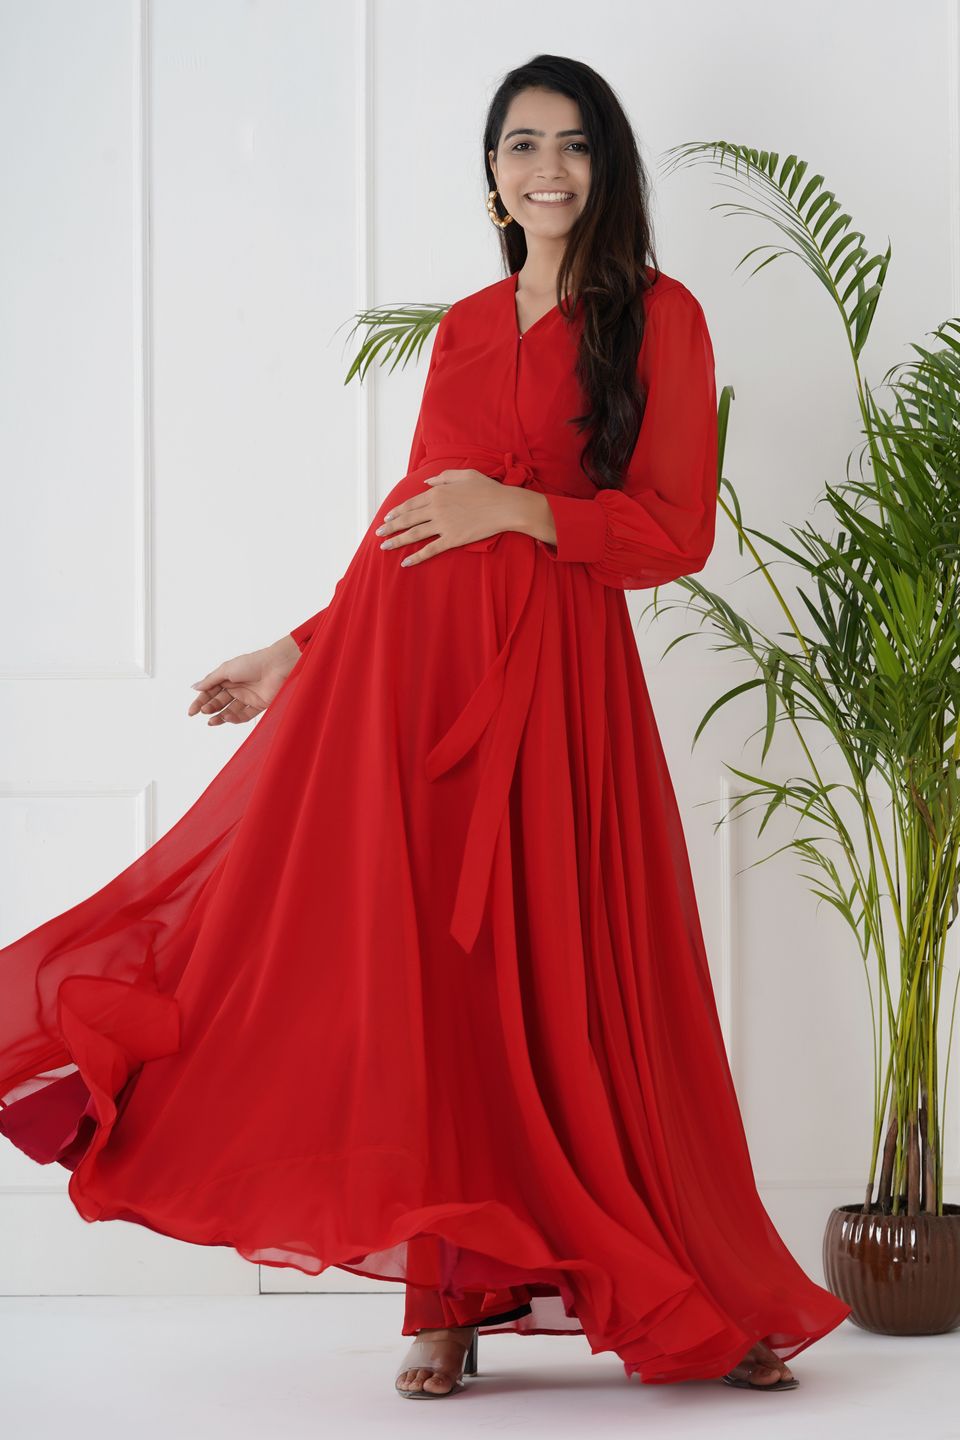 Plum and Peaches Long Sleeve Pleated Maternity Red Gown